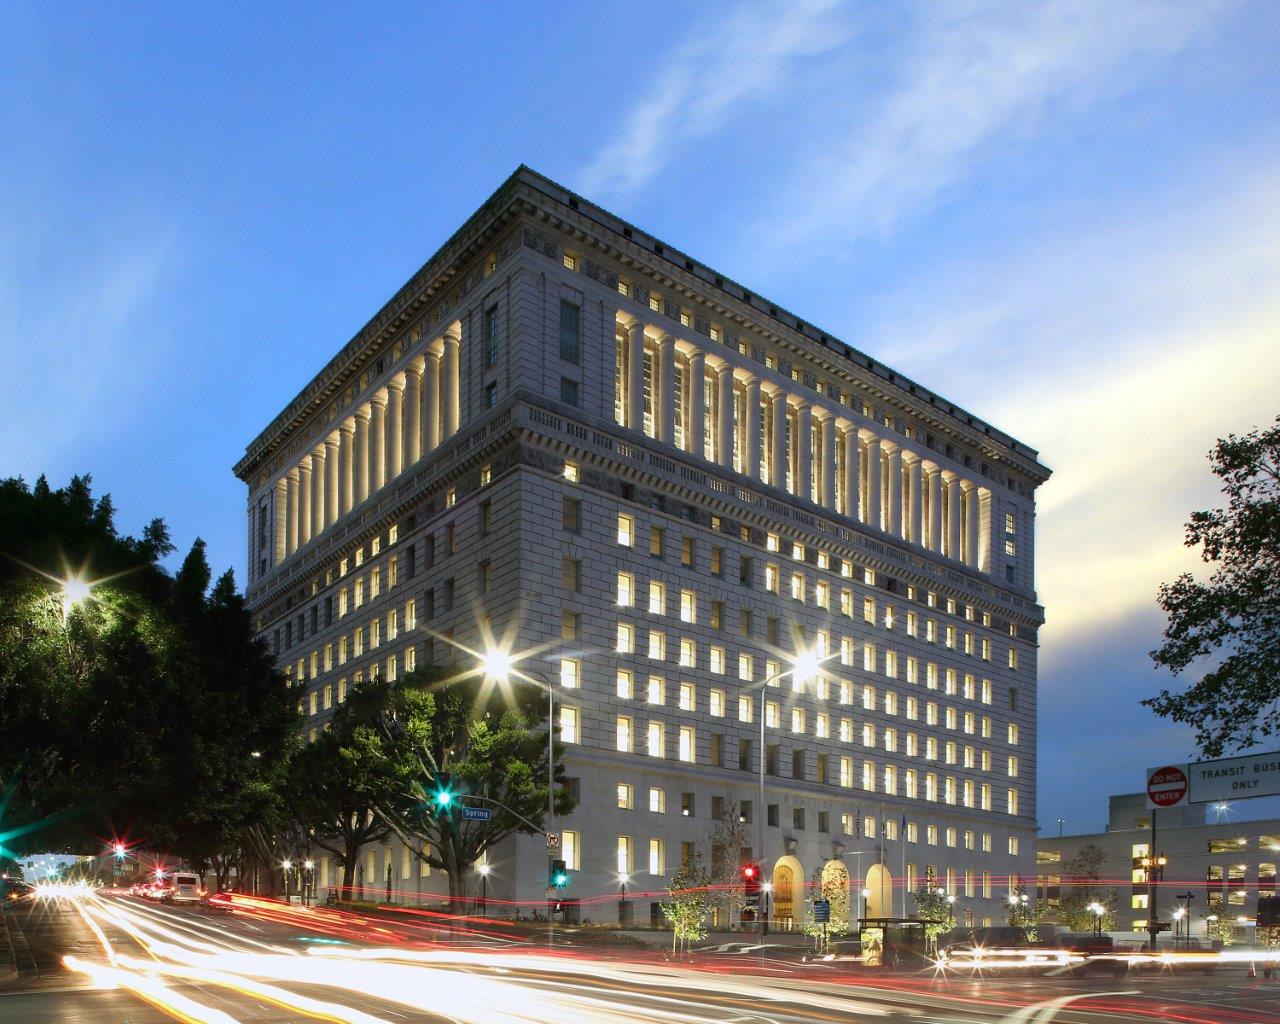  Contract Law Enforcement Bureau is located at Hall of Justice.  (Click to display link above)